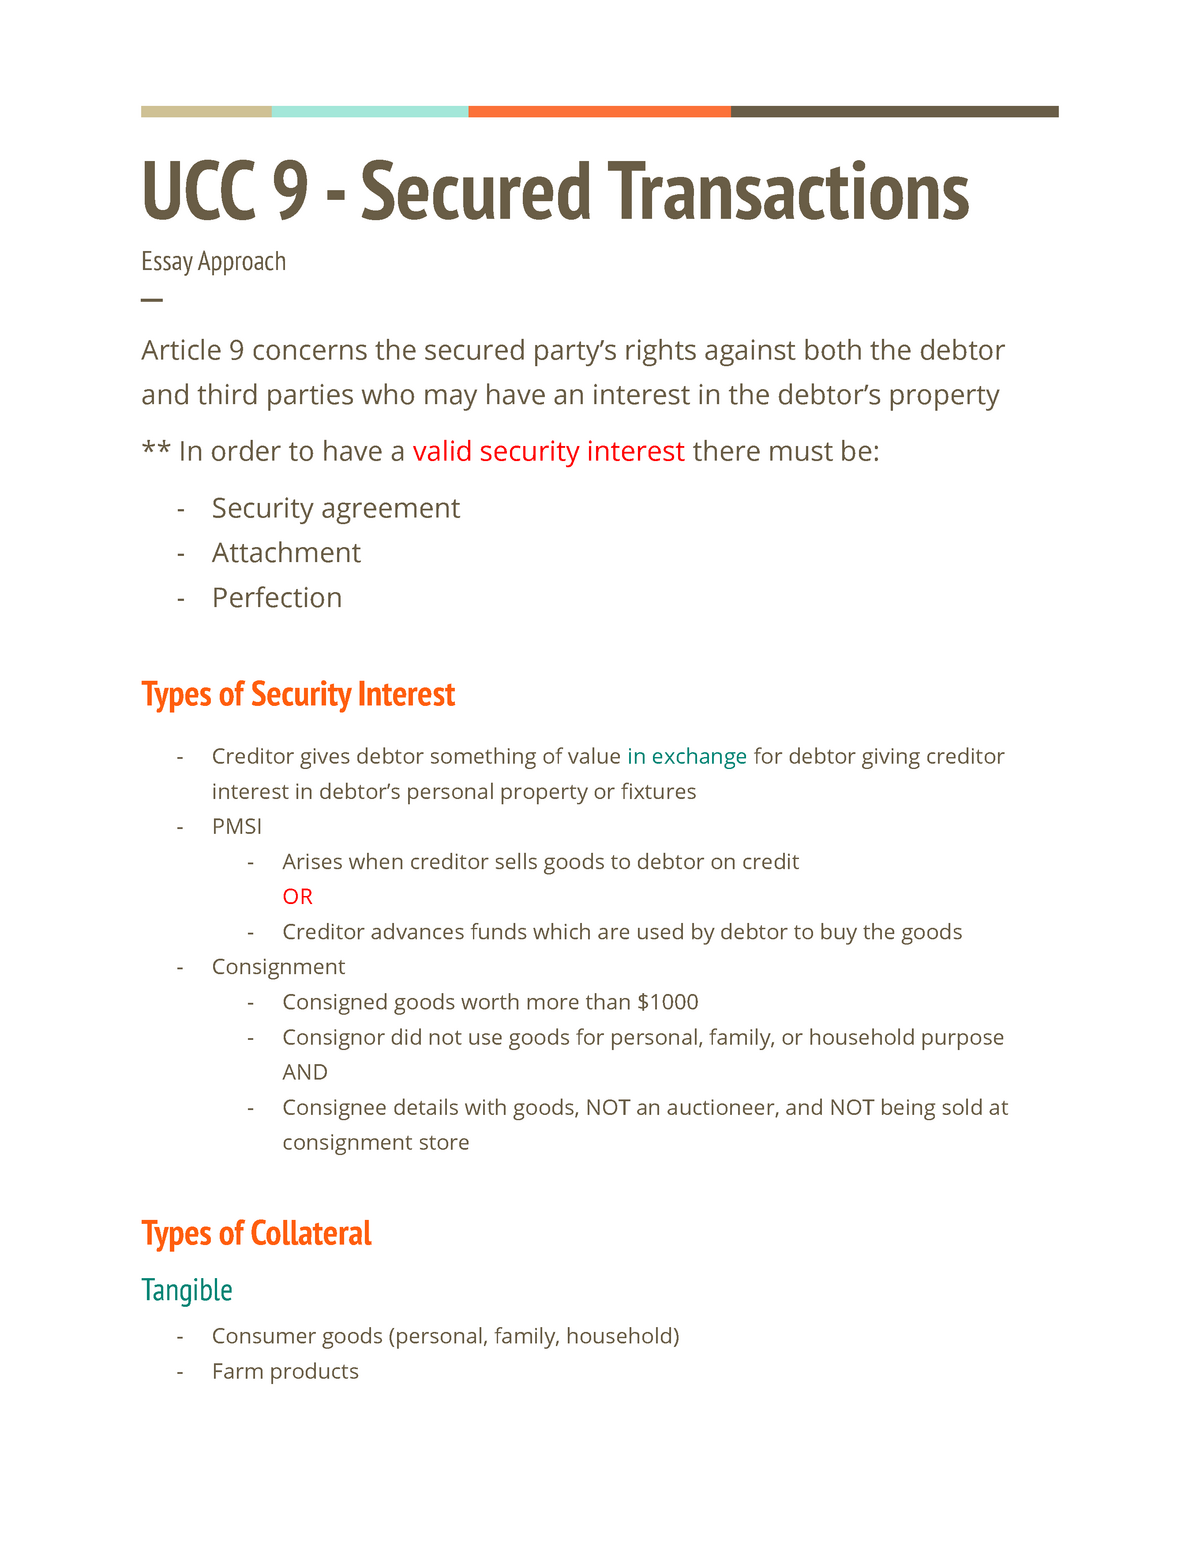 ucc-9-lecture-notes-ucc-9-secured-transactions-essay-approach